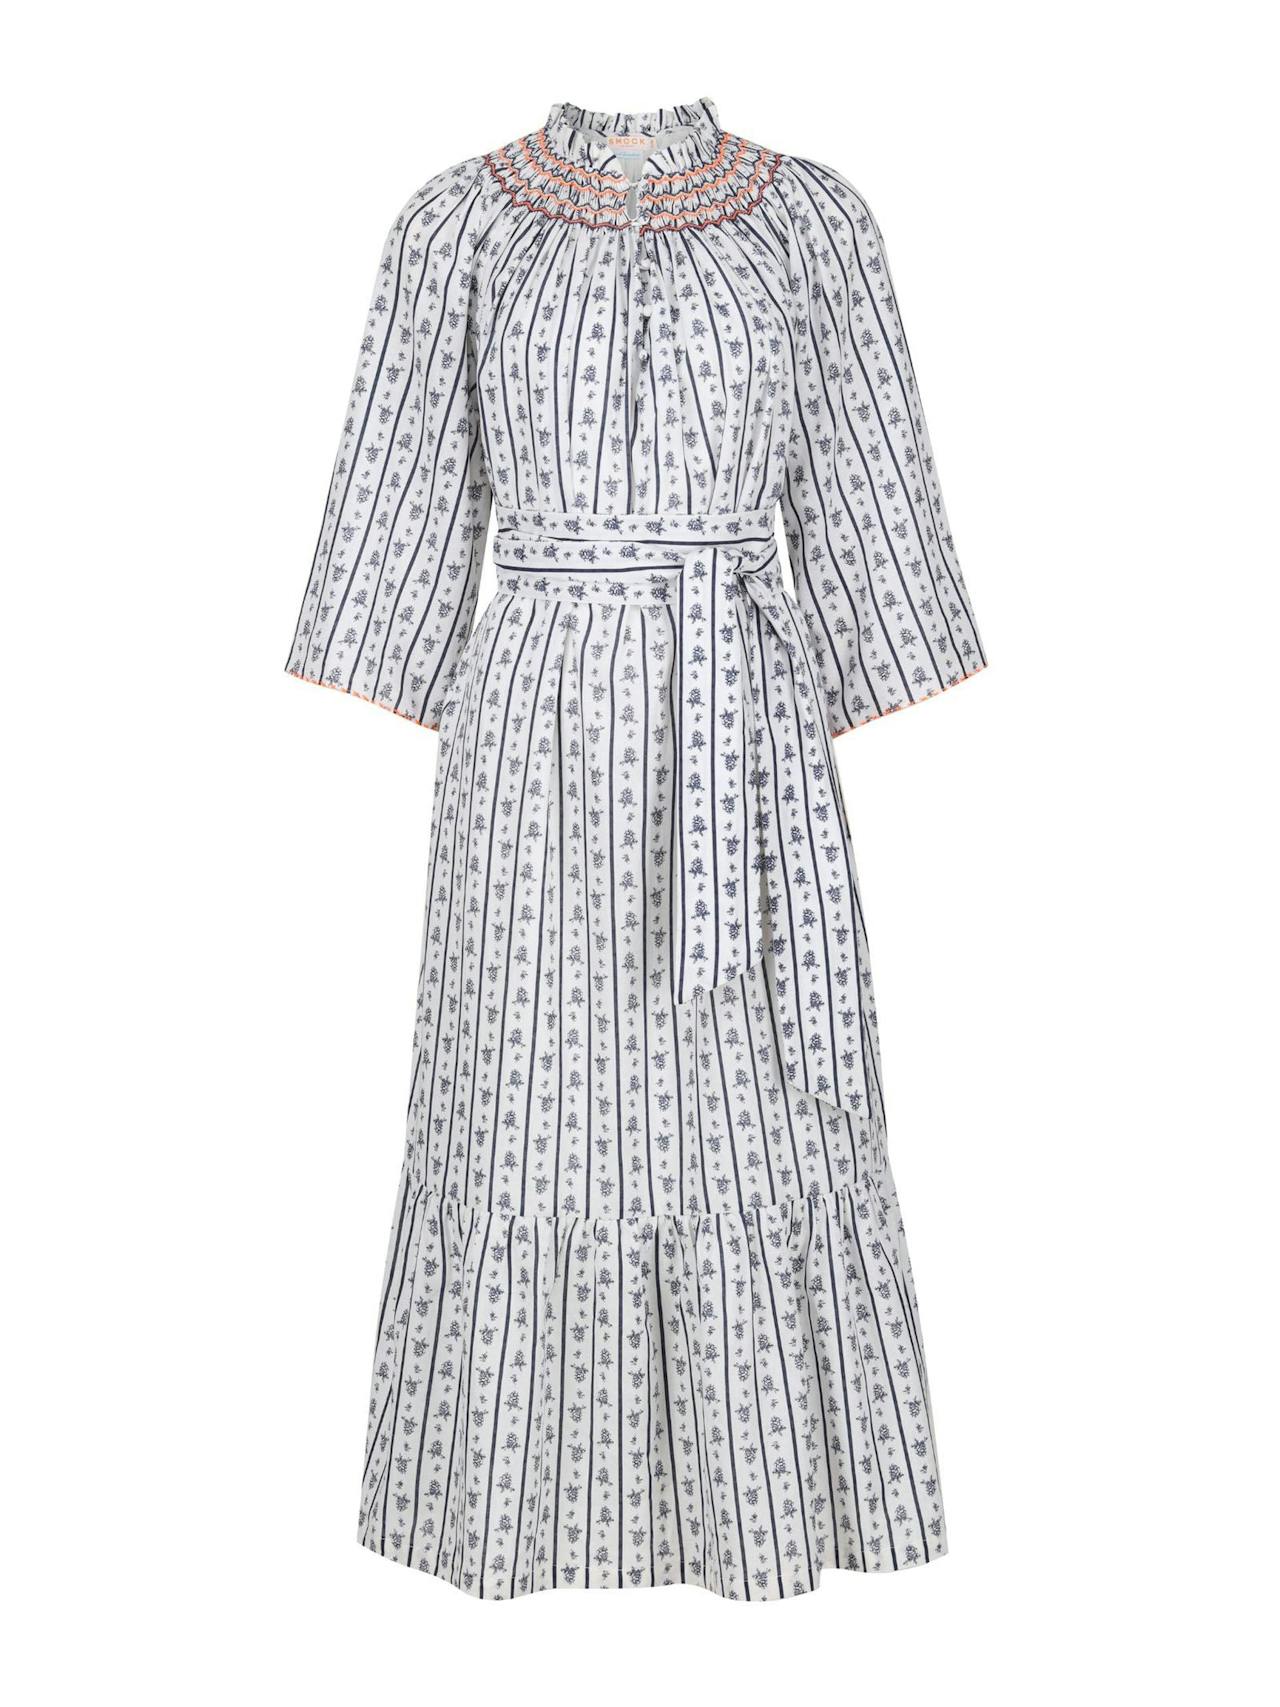 Colette dress the grape escape linen with lady marmalade hand smocking